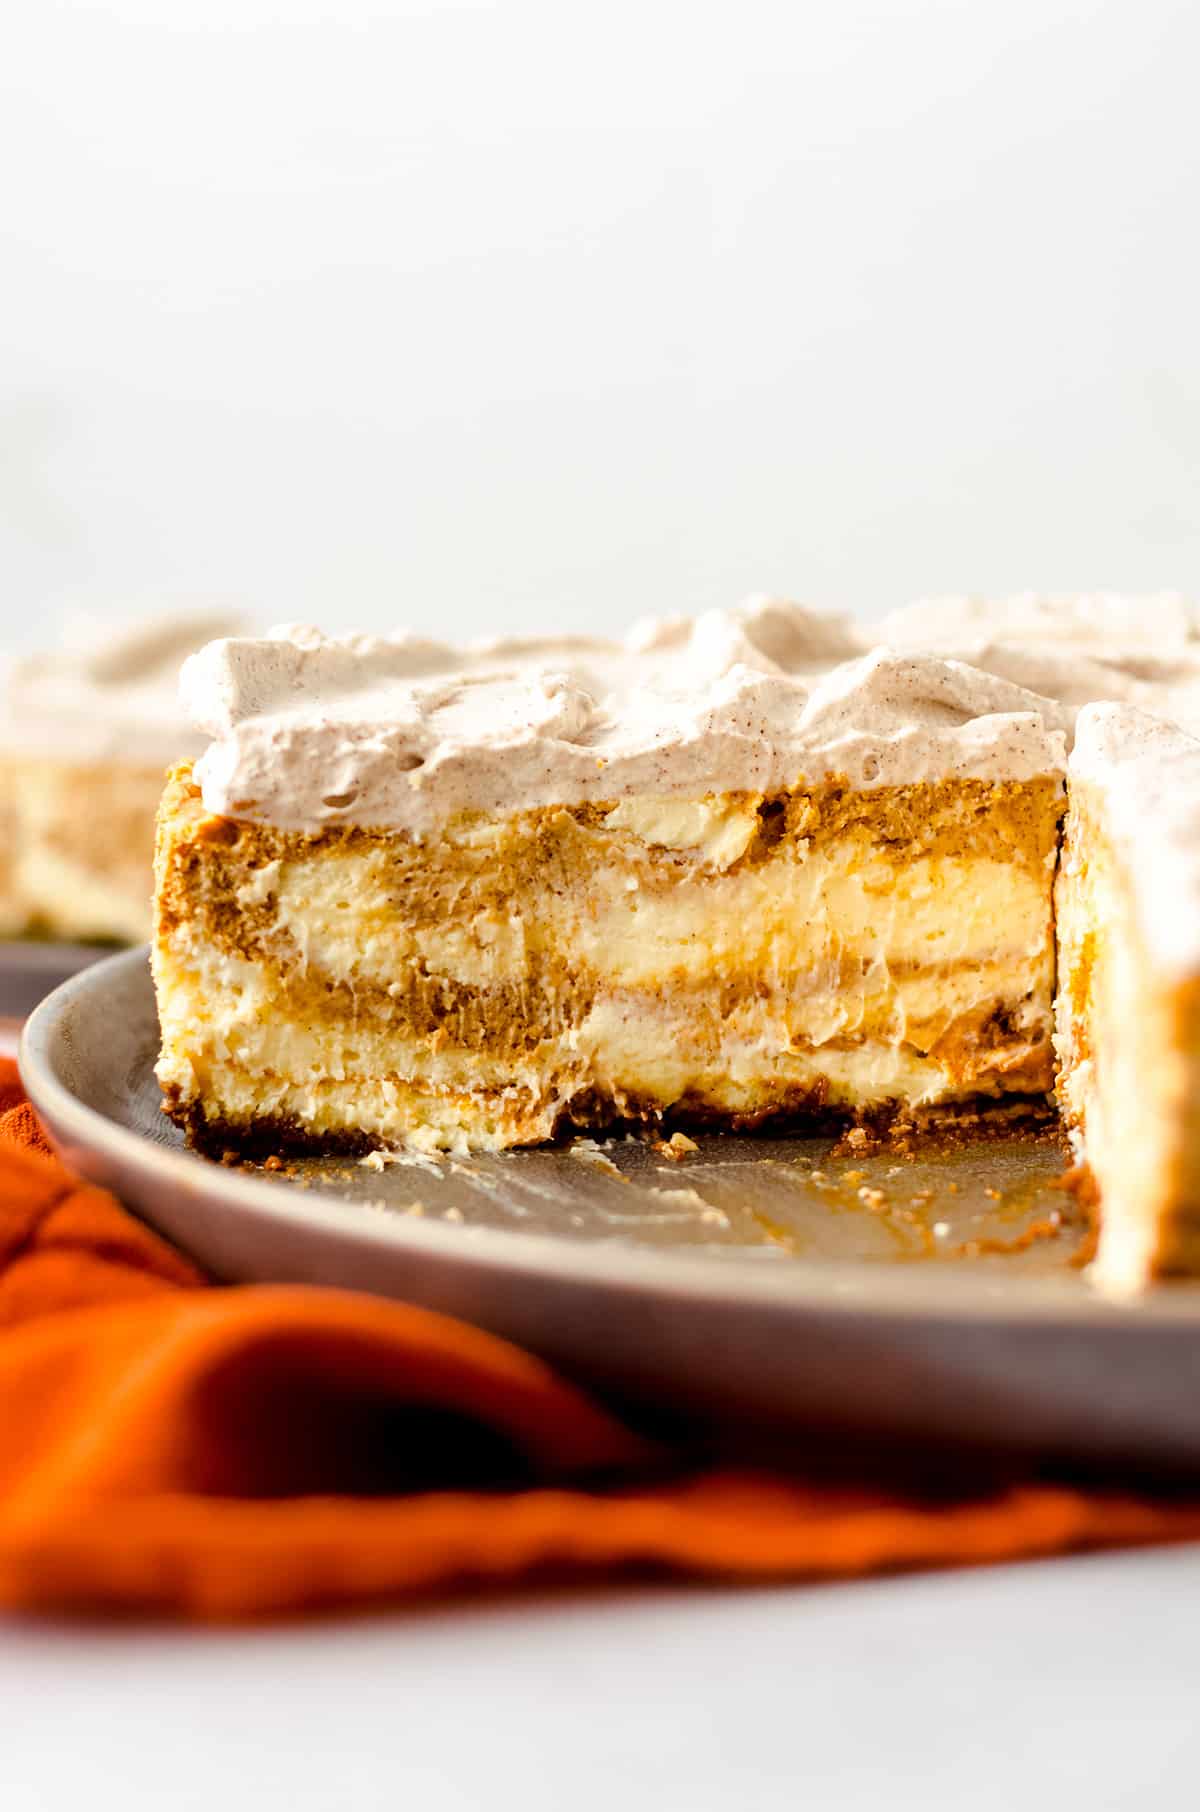 A side view of a large pumpkin swirl cheesecake.